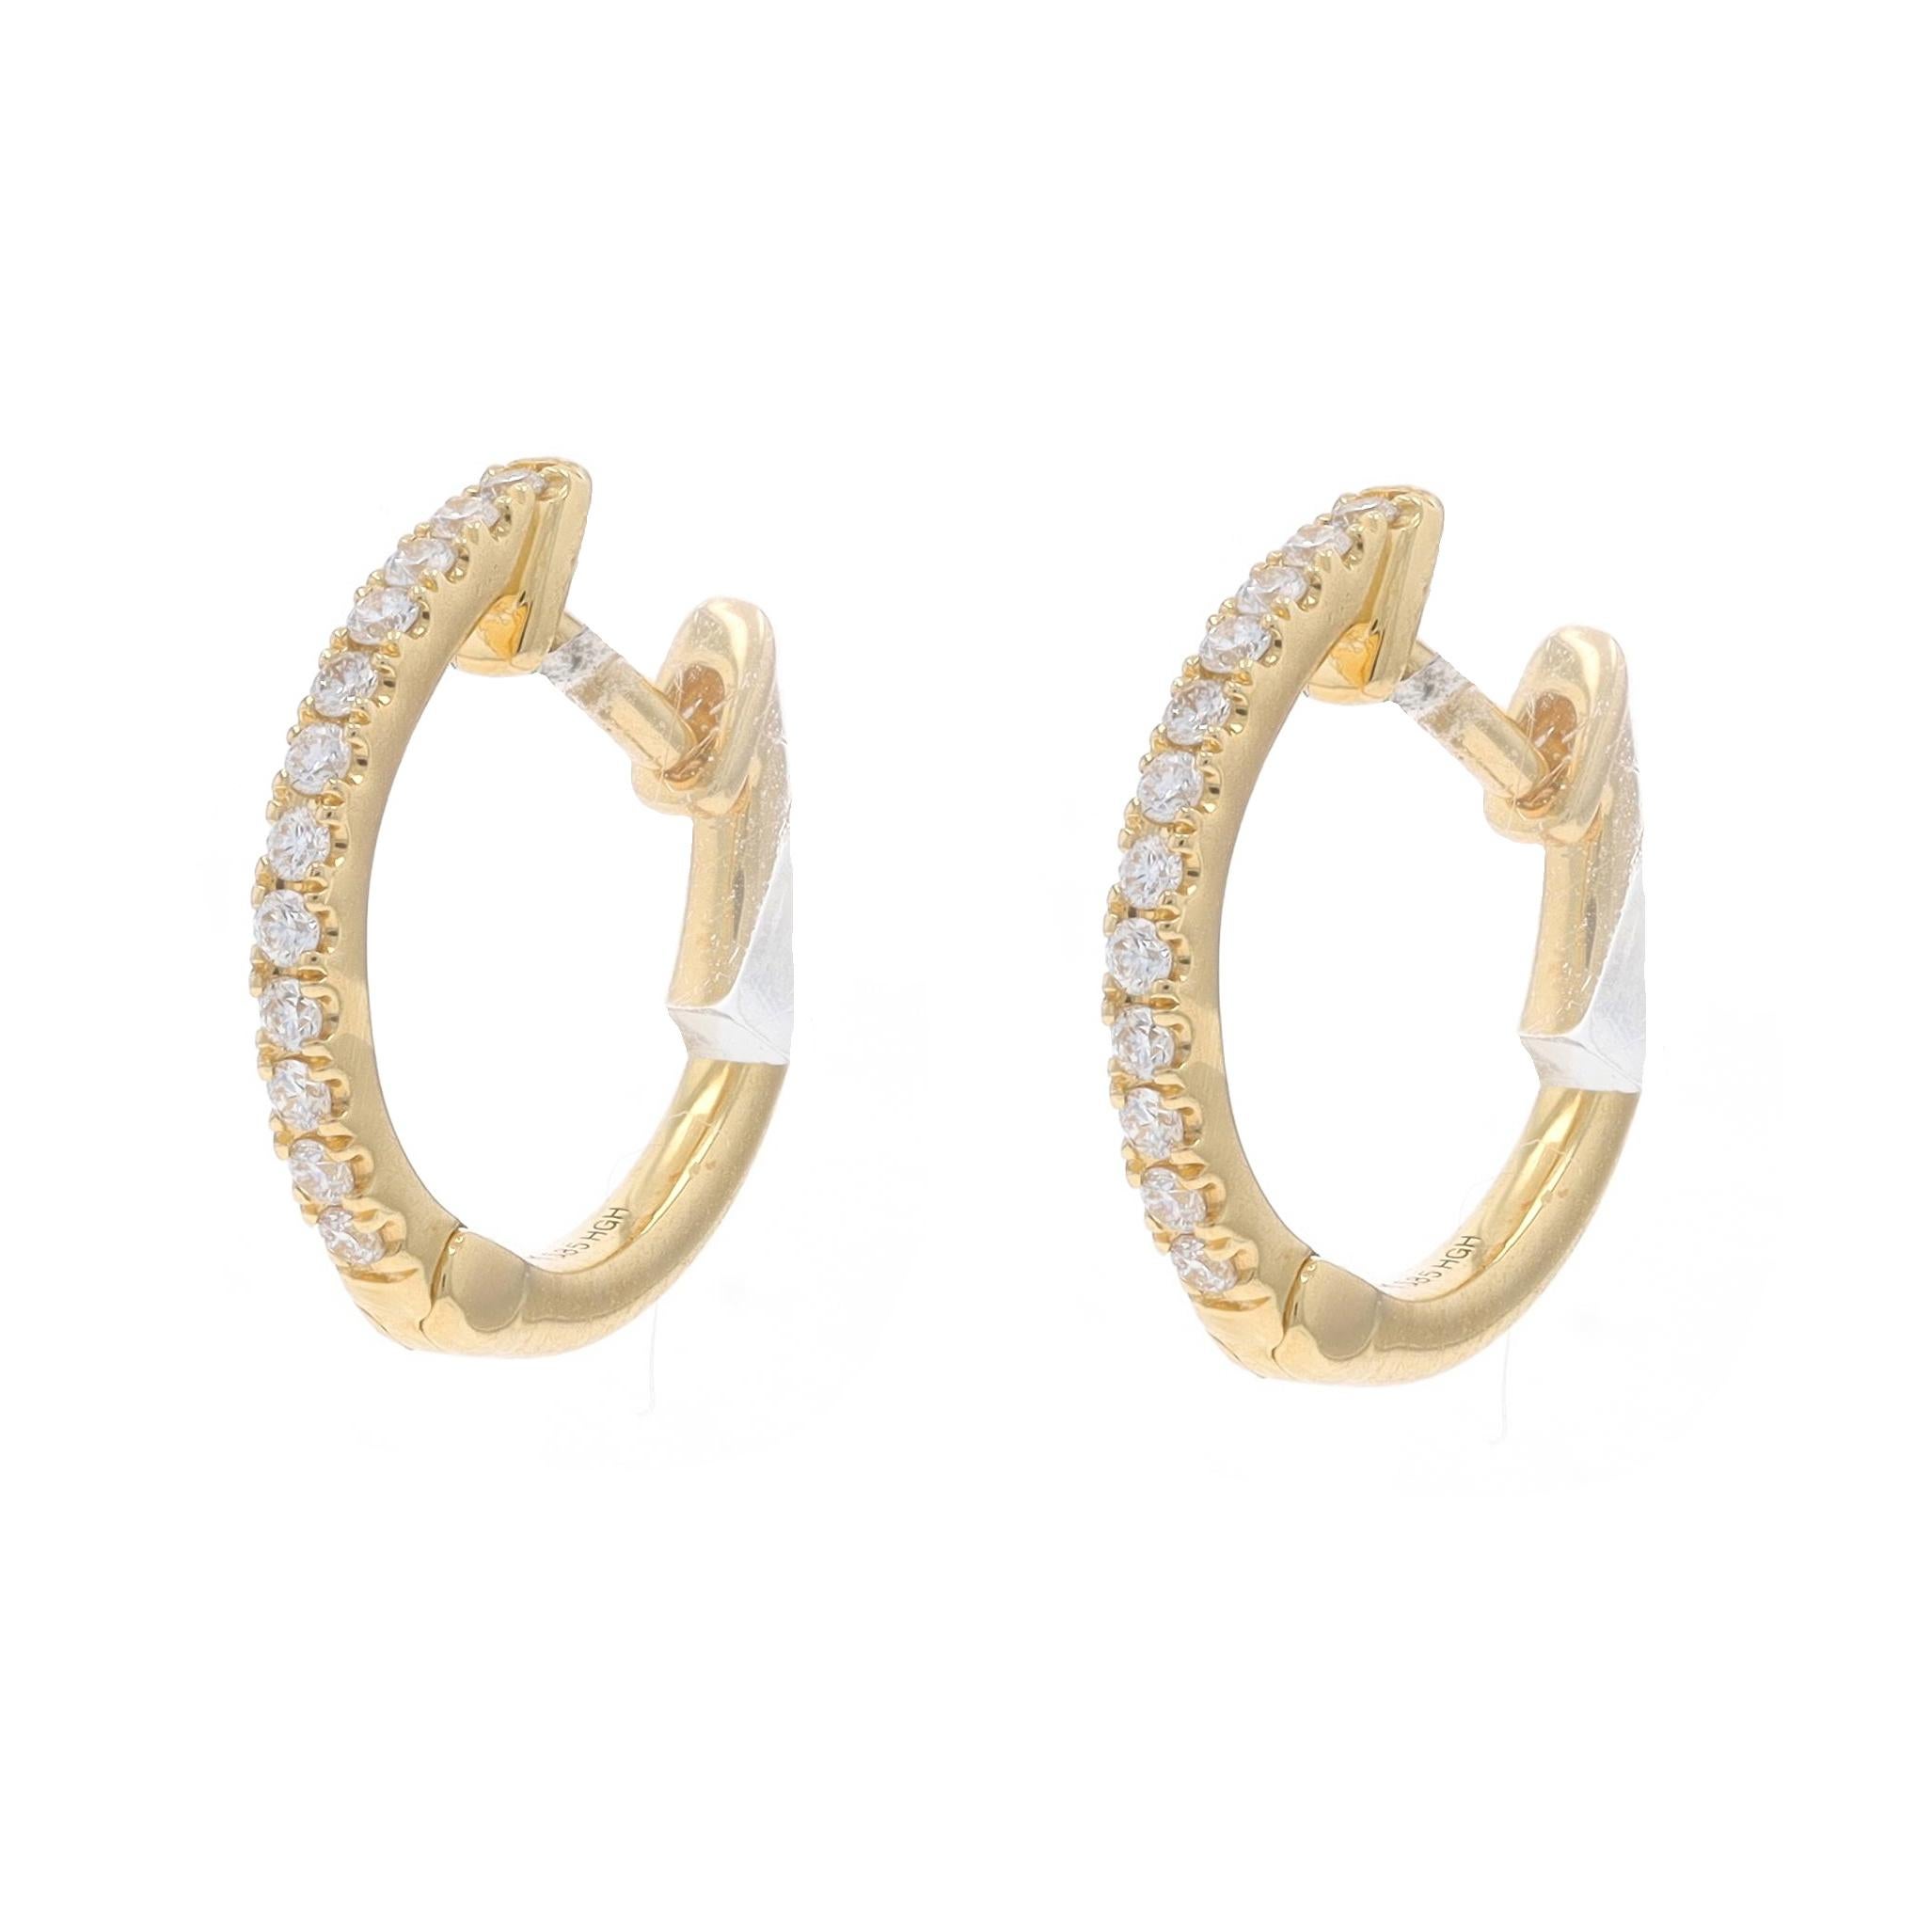 Metal Content: 14k Yellow Gold

Stone Information

Natural Diamonds
Carat(s): .12ctw
Cut: Round Brilliant
Color: G
Clarity: VS2 - SI1

Total Carats: .12ctw

Style: Huggie Hoop
Fastening Type: Snap Closures
Features: French Set